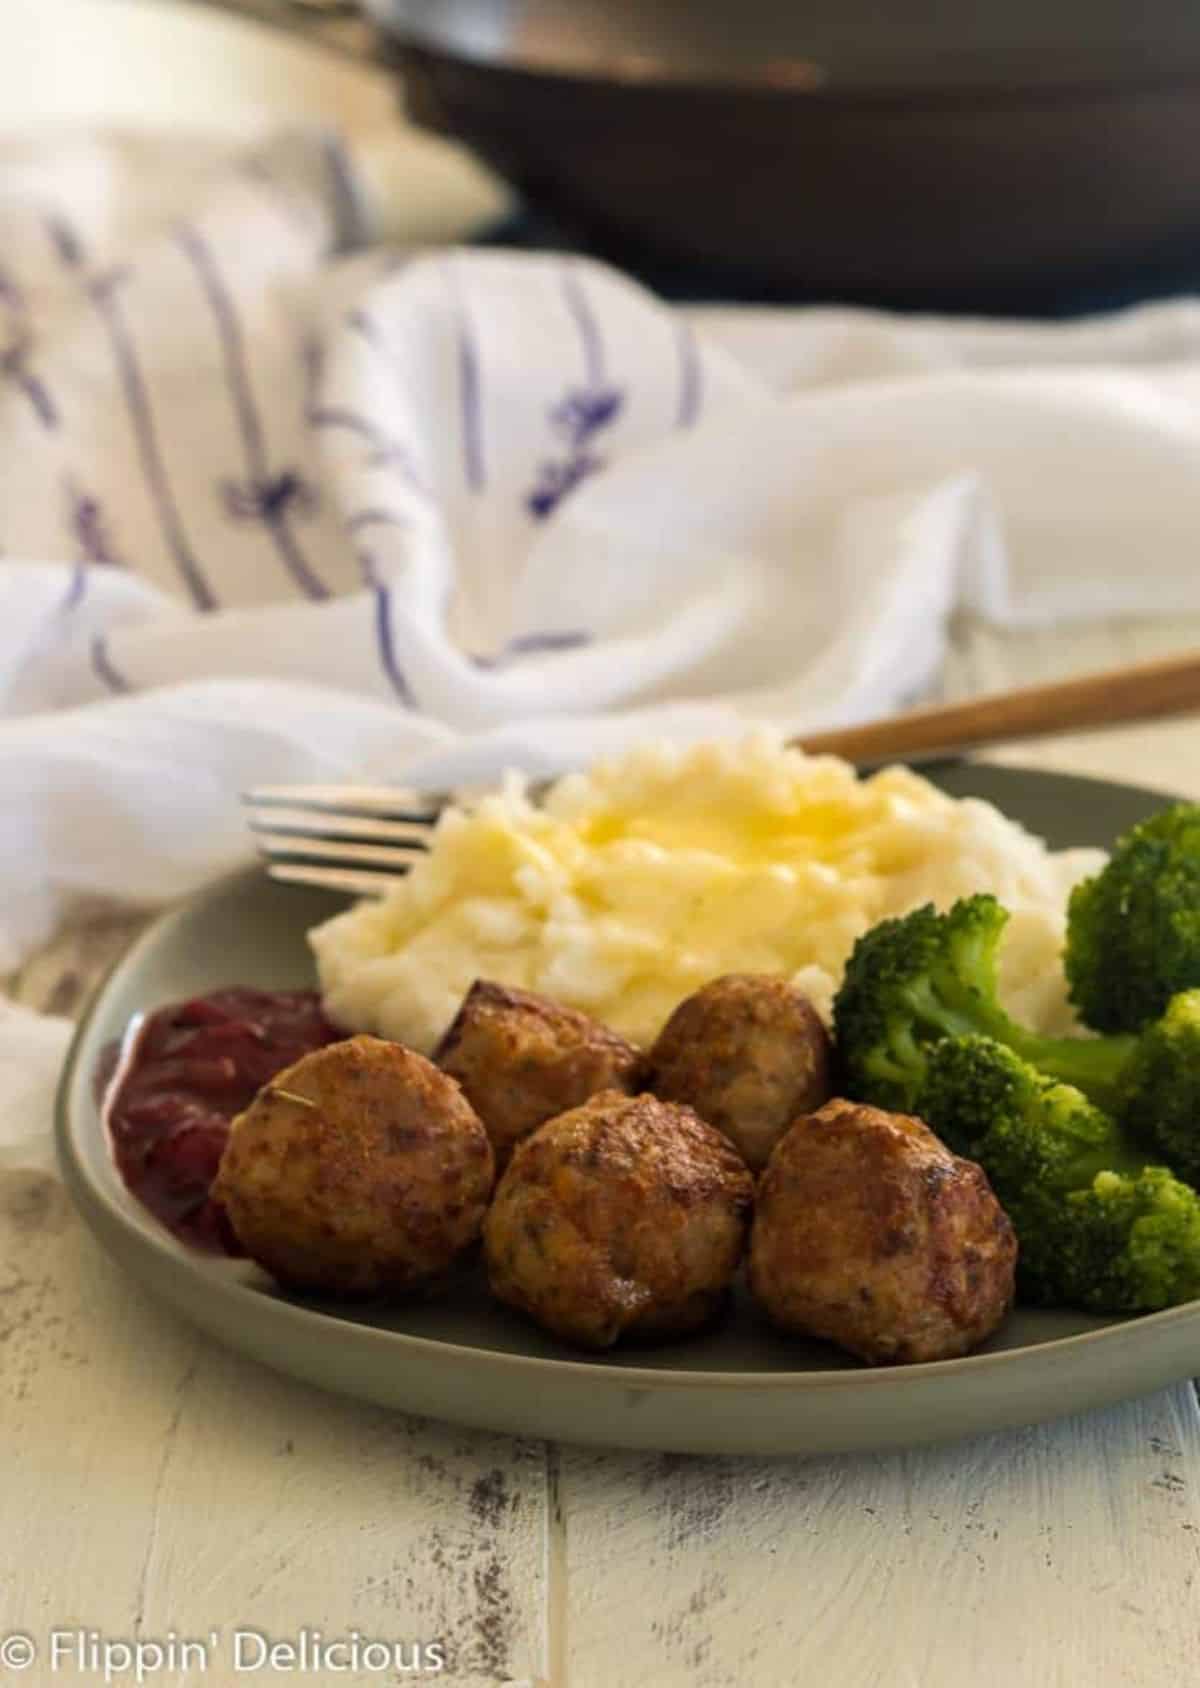 Scrumptious Gluten-Free Meatballs with mashed potatoes and broccoli on a gray plate.